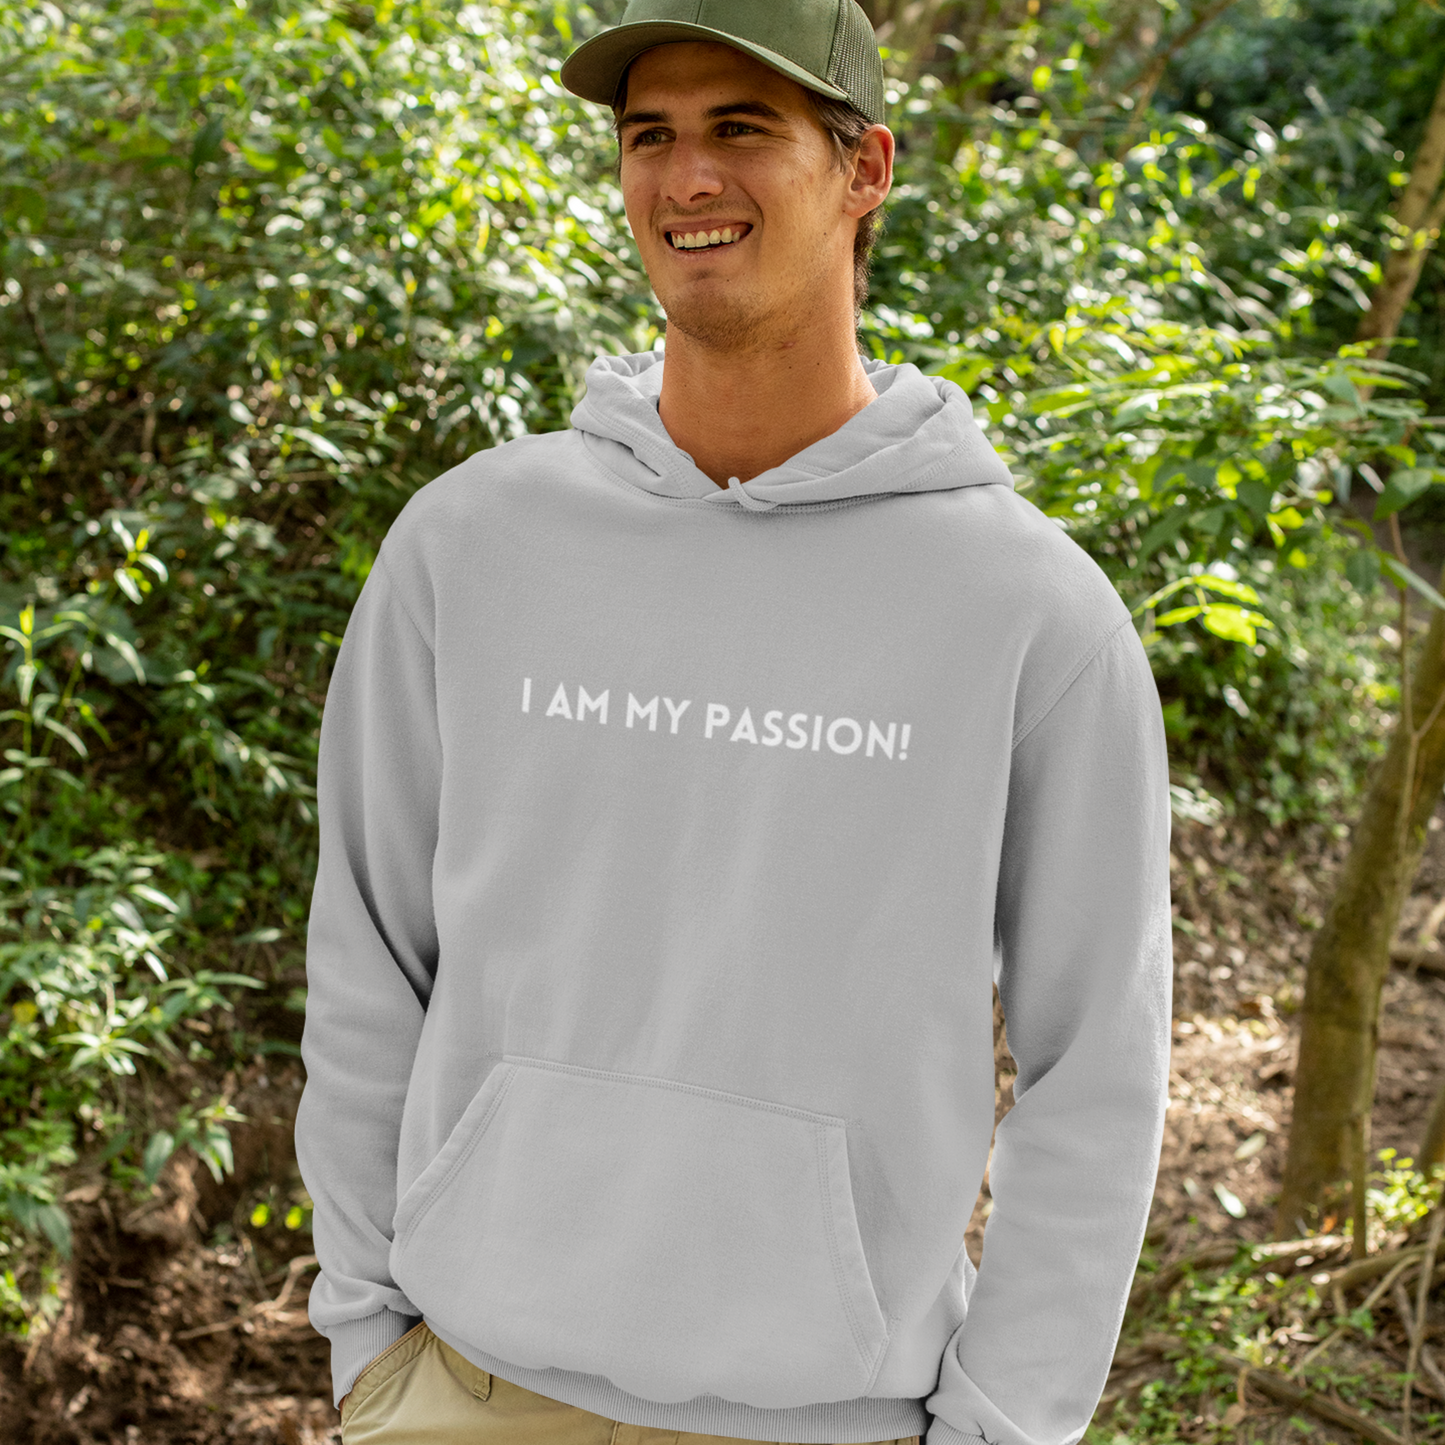 I am my passion unisex hooded sweatshirt gift,  inspirational words hoodie gift, hoodie gift for friends or family